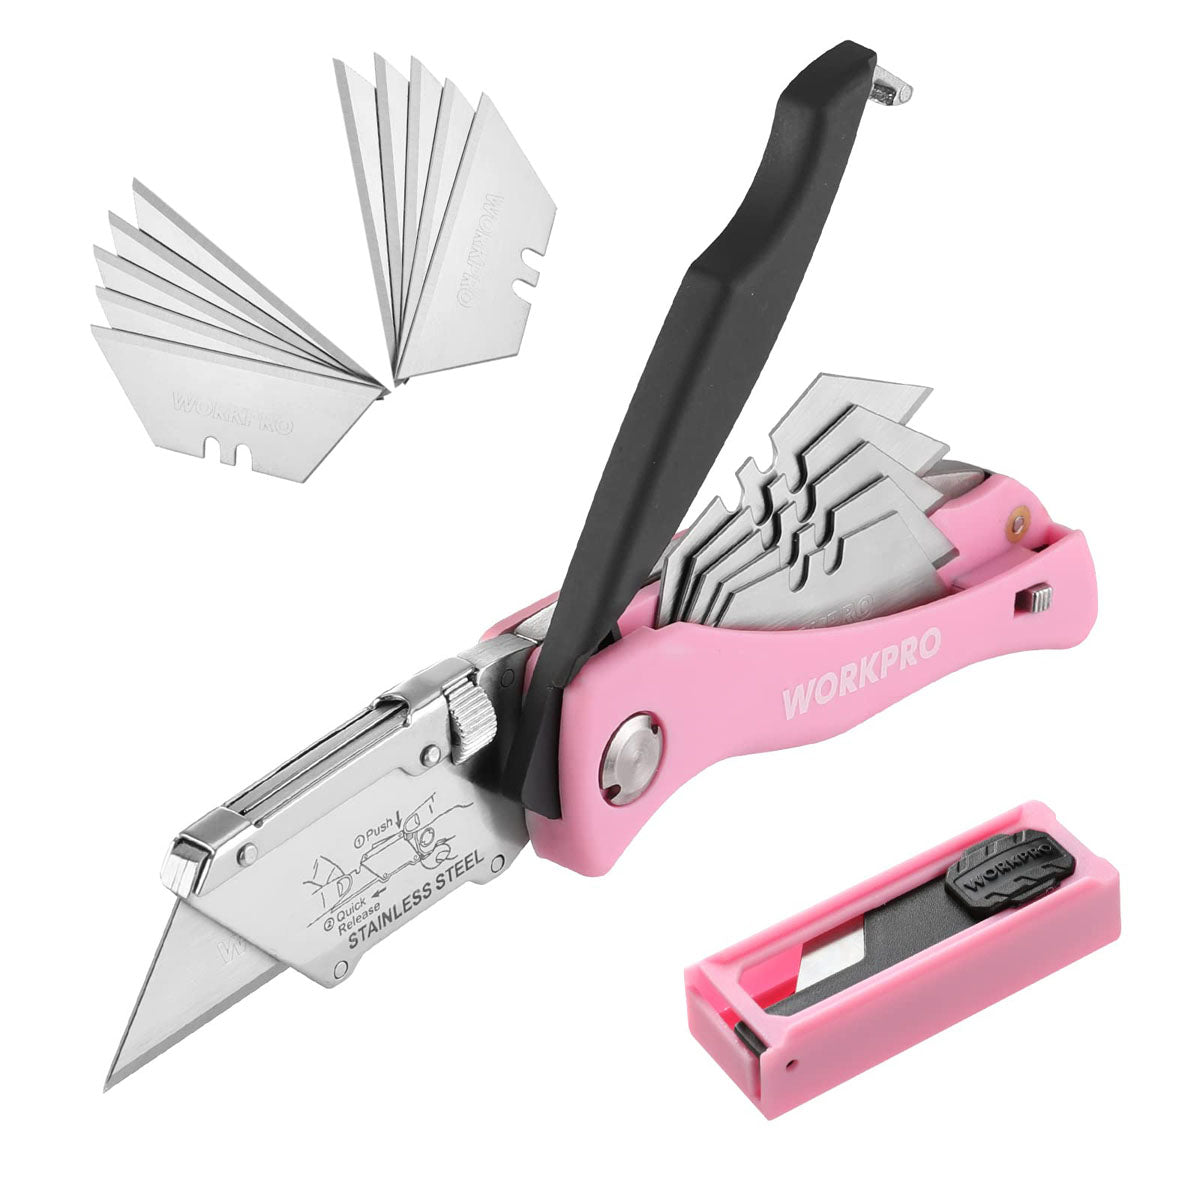 3 NEON PINK Safety Box Cutter Utility Knife Retractable Snap off Razor  Blade